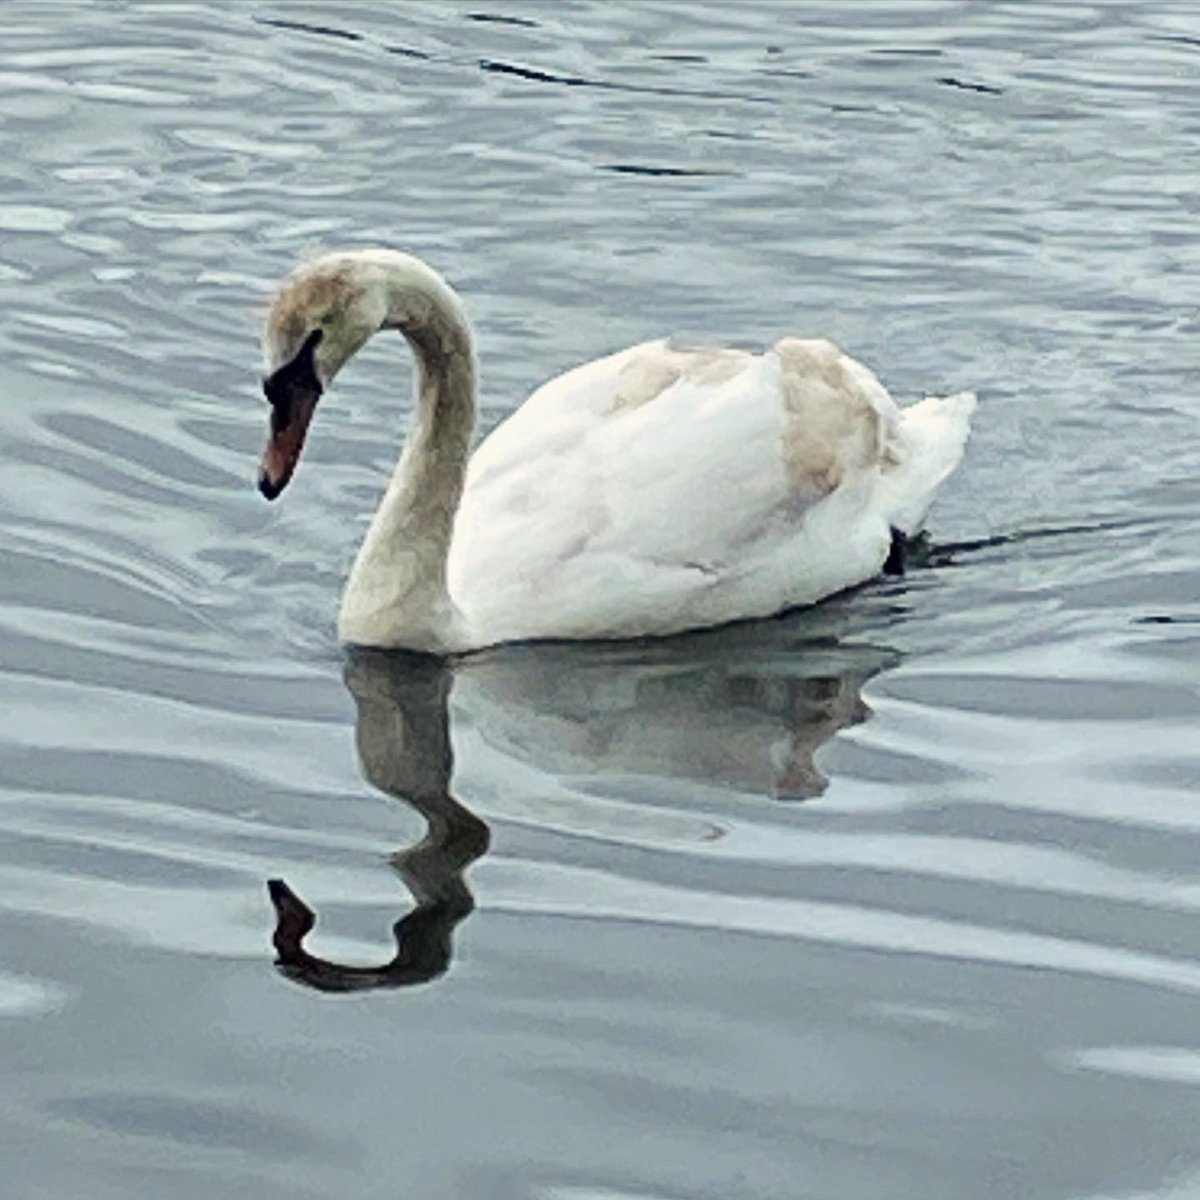 Stratford ? Worcester? Bewdley ? No, #Birmingham ! 2km out of the city along the #birminghamcanal past the #roundhouse to the #localnaturereserve at #edgbastonreservoir . The swans are back.